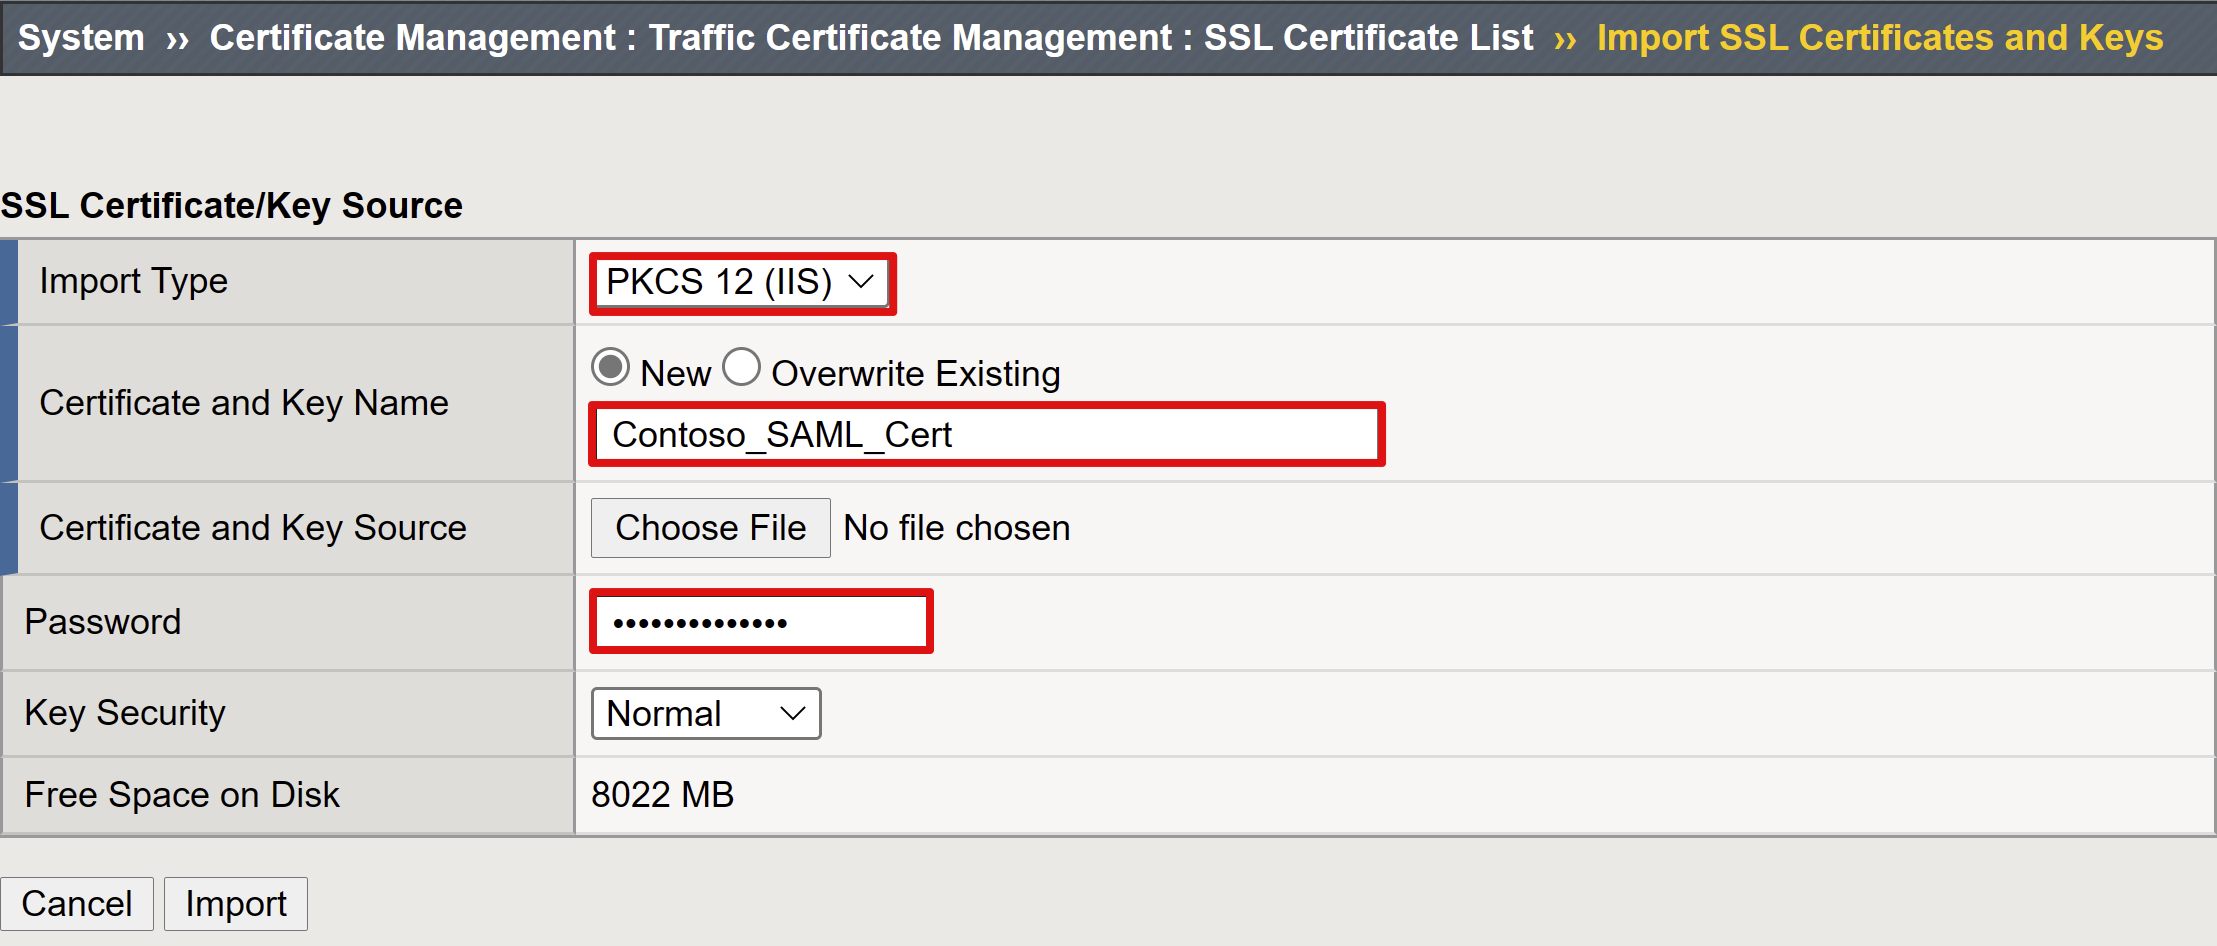 Screenshot of options and selections for Import SSL Certificates and Keys.